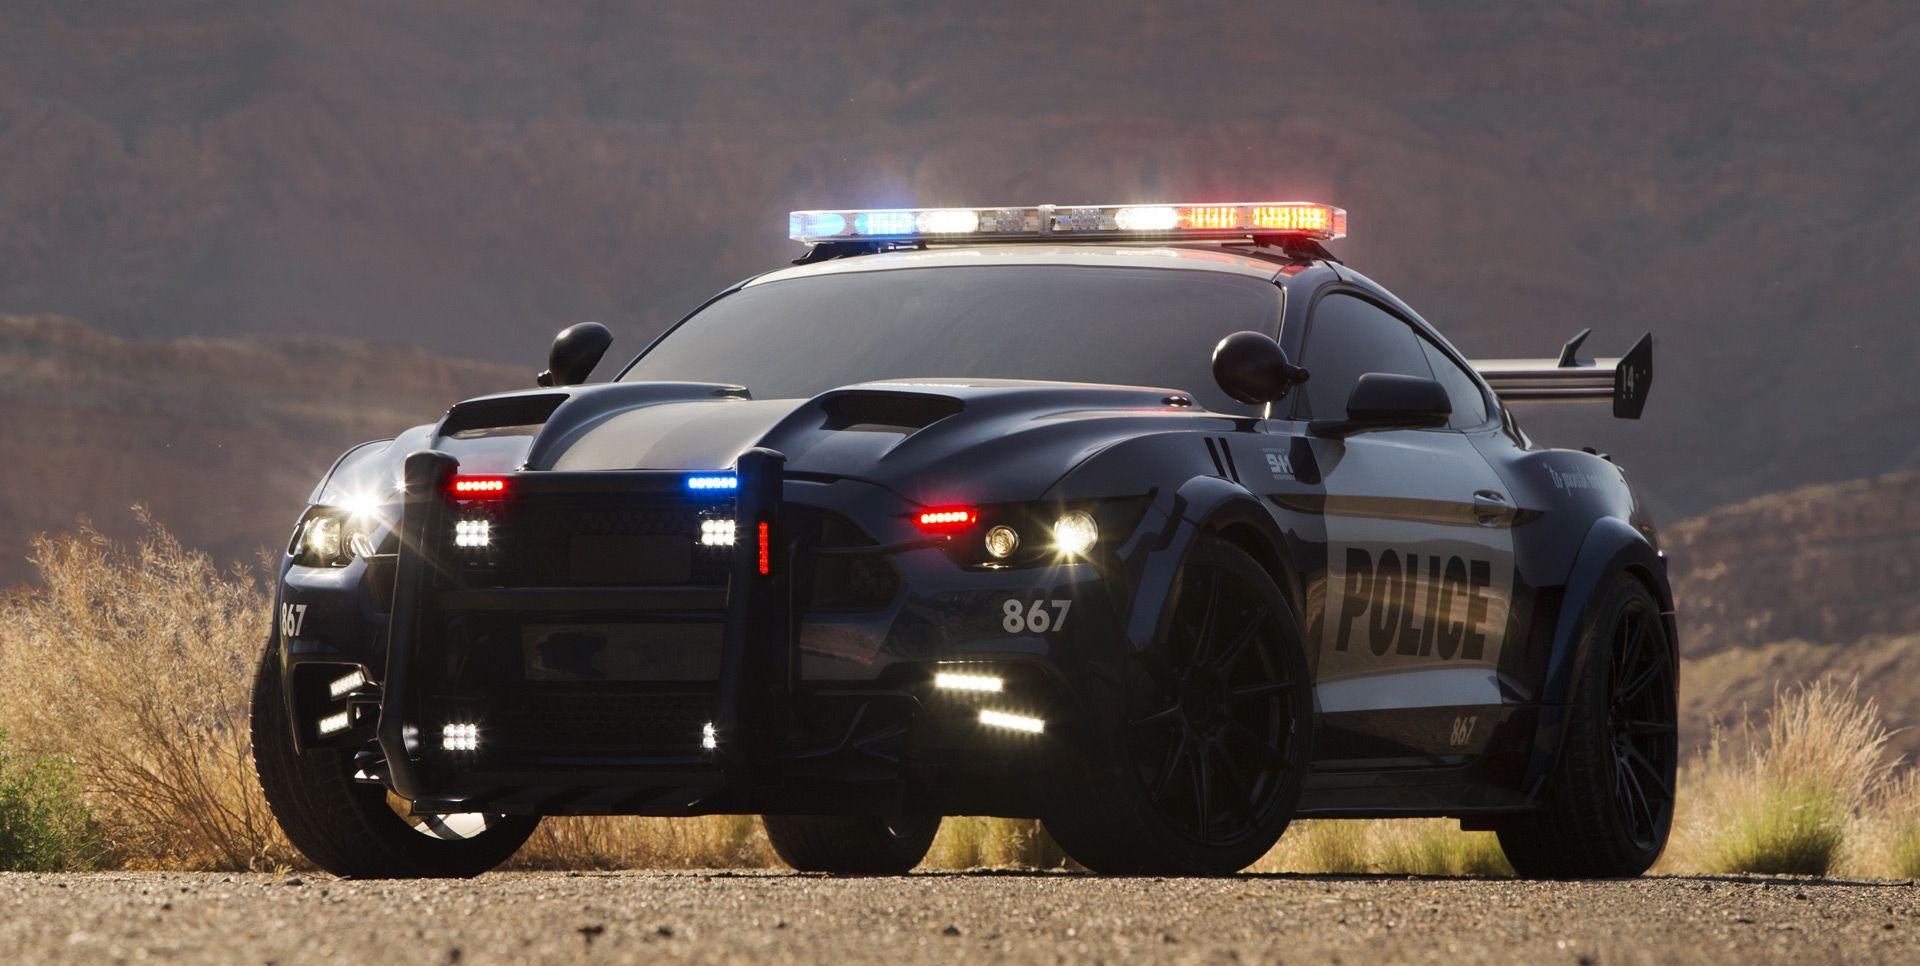 Transformers 5's Barricade revealed as Ford Mustang cop car